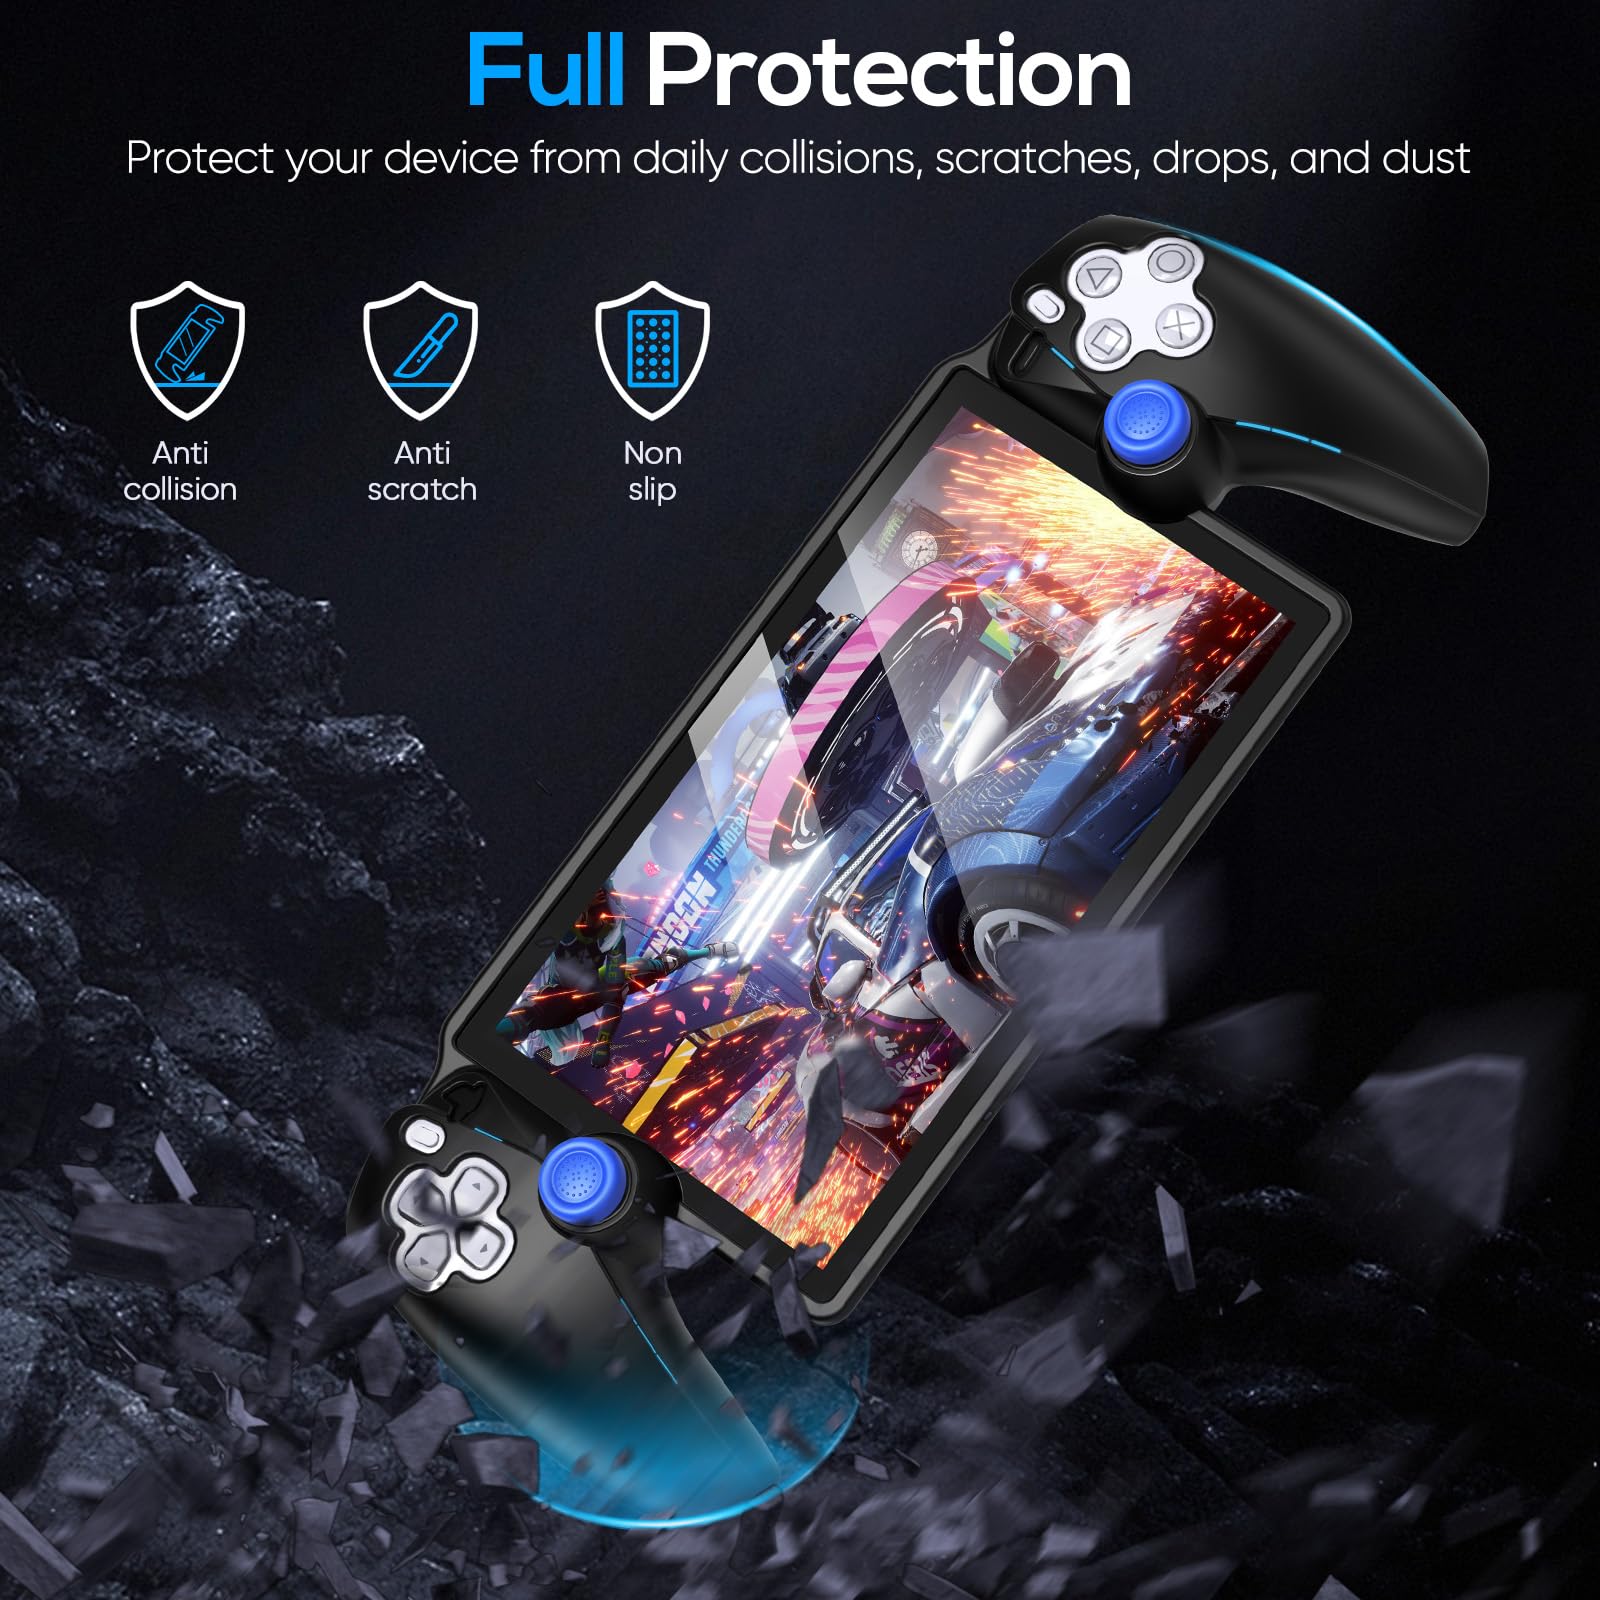  Protective Case for Playstation Portal Remote Player - Soft  Silicone Protective Skin Cover with Thumb Joystick Caps Game Accessories  Kit for PS5 Portal 2023 : Video Games